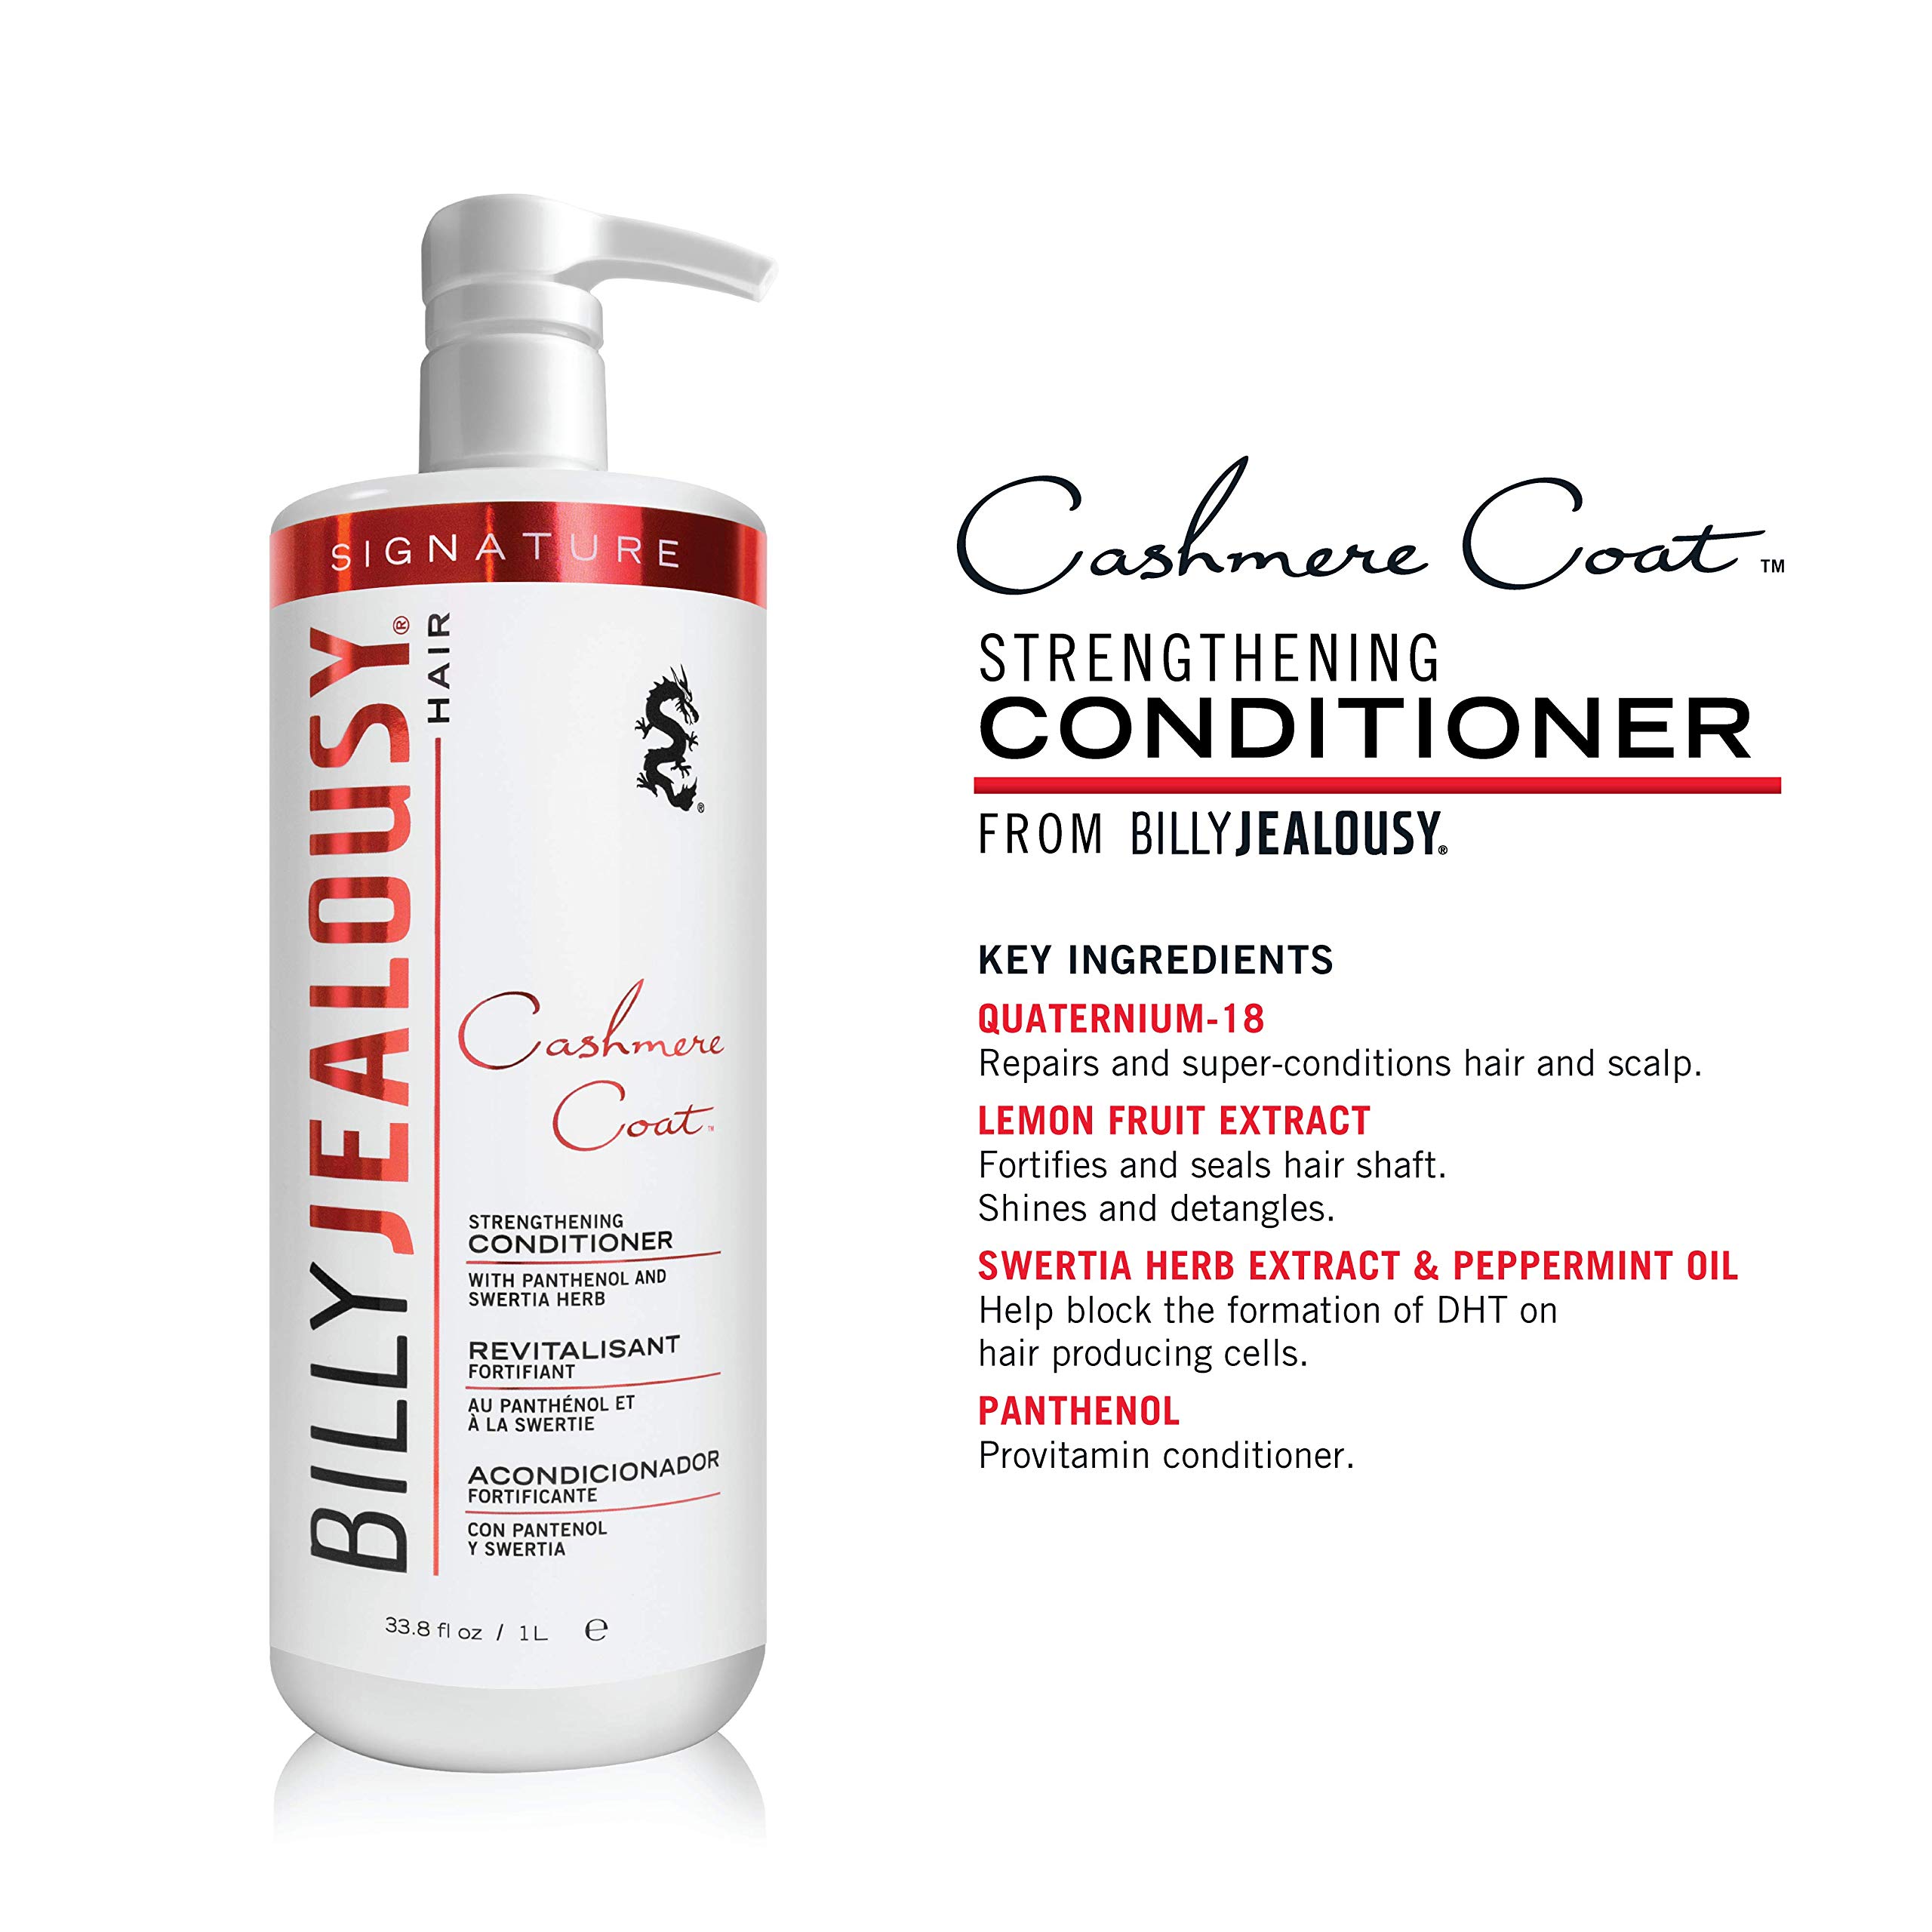 Billy Jealousy Cashmere Coat Hair Conditioner for Men, Peppermint-Infused, With DHT Blockers to Prevent Hair Loss and Breakage, Safe for Color-Treated Hair